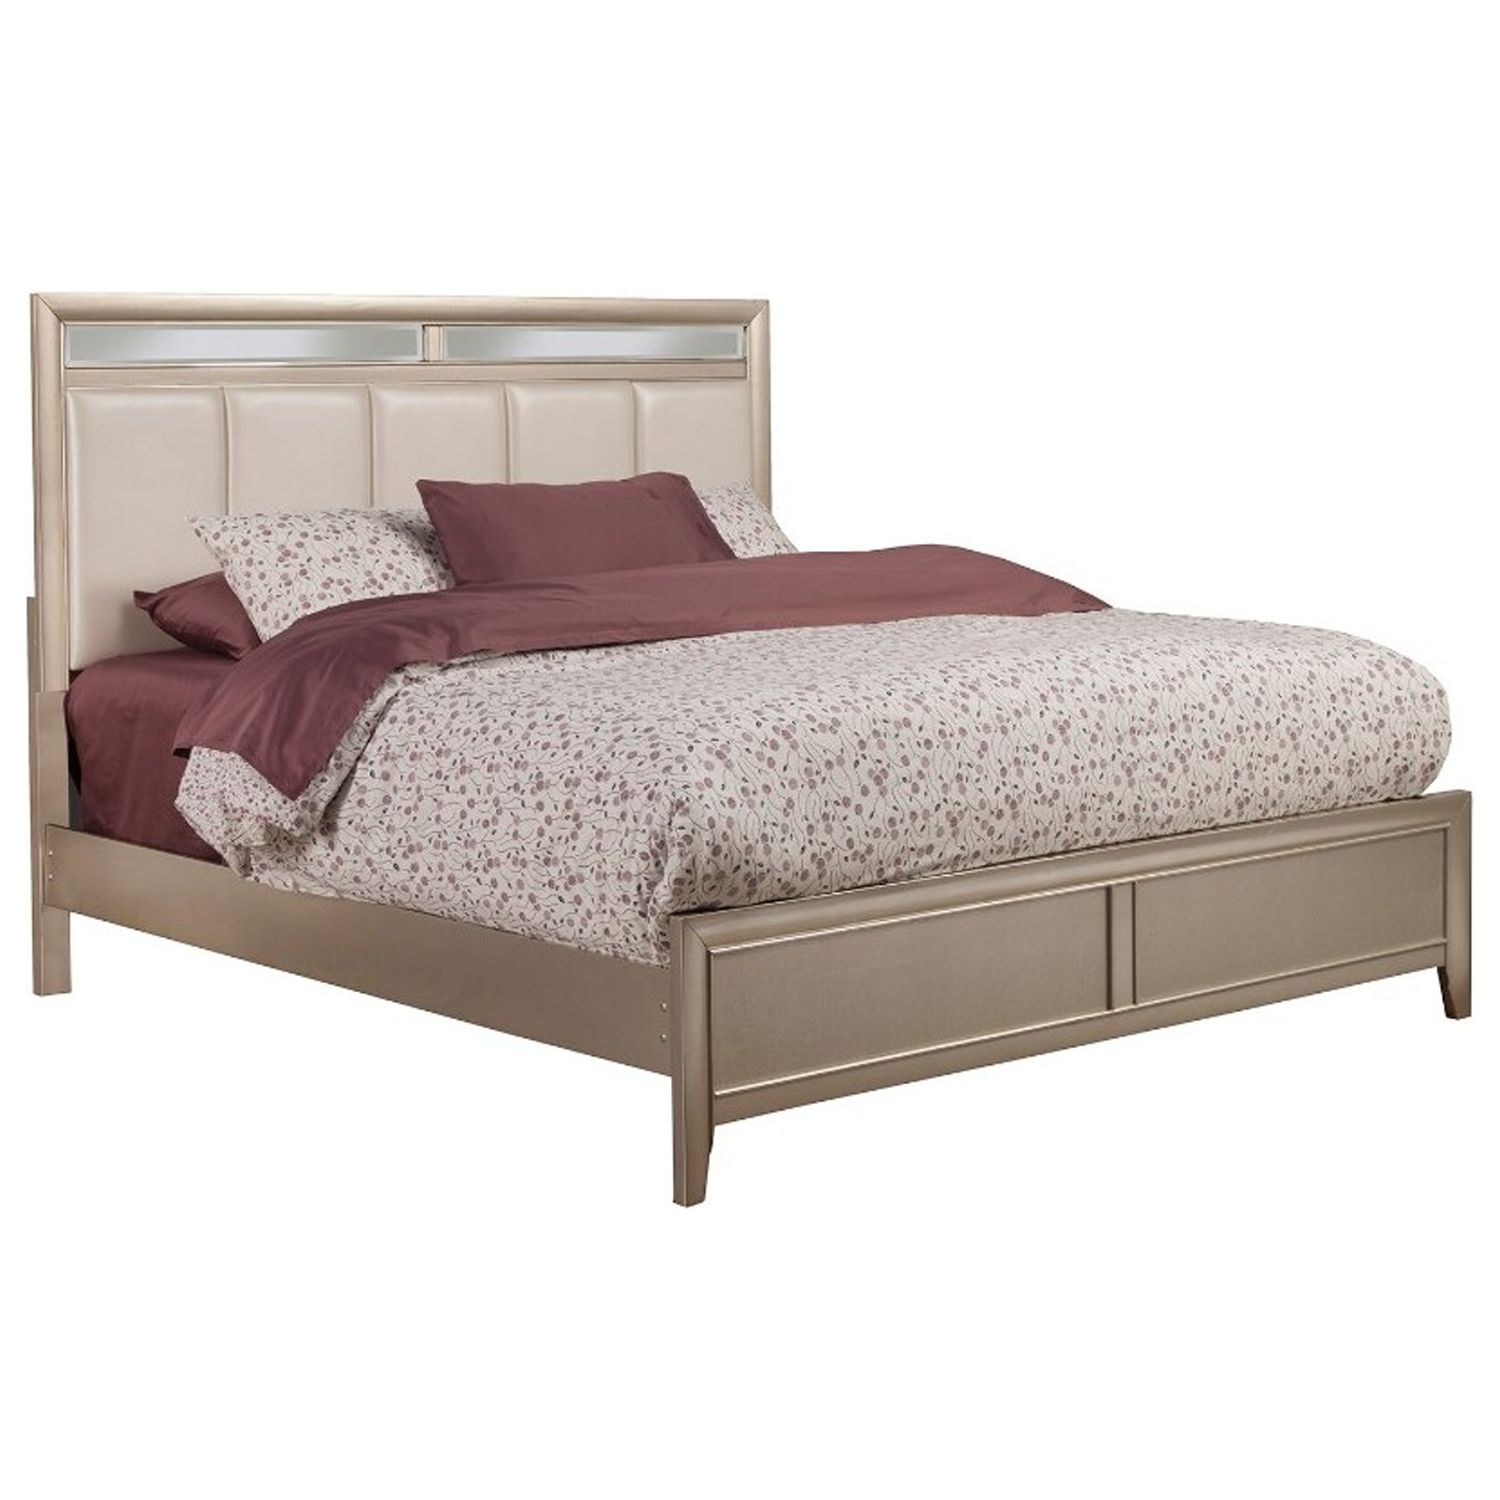 BenJara Pine Wood Queen Size Panel Bed With Upholstered Headboard, Silver - image 1 of 3